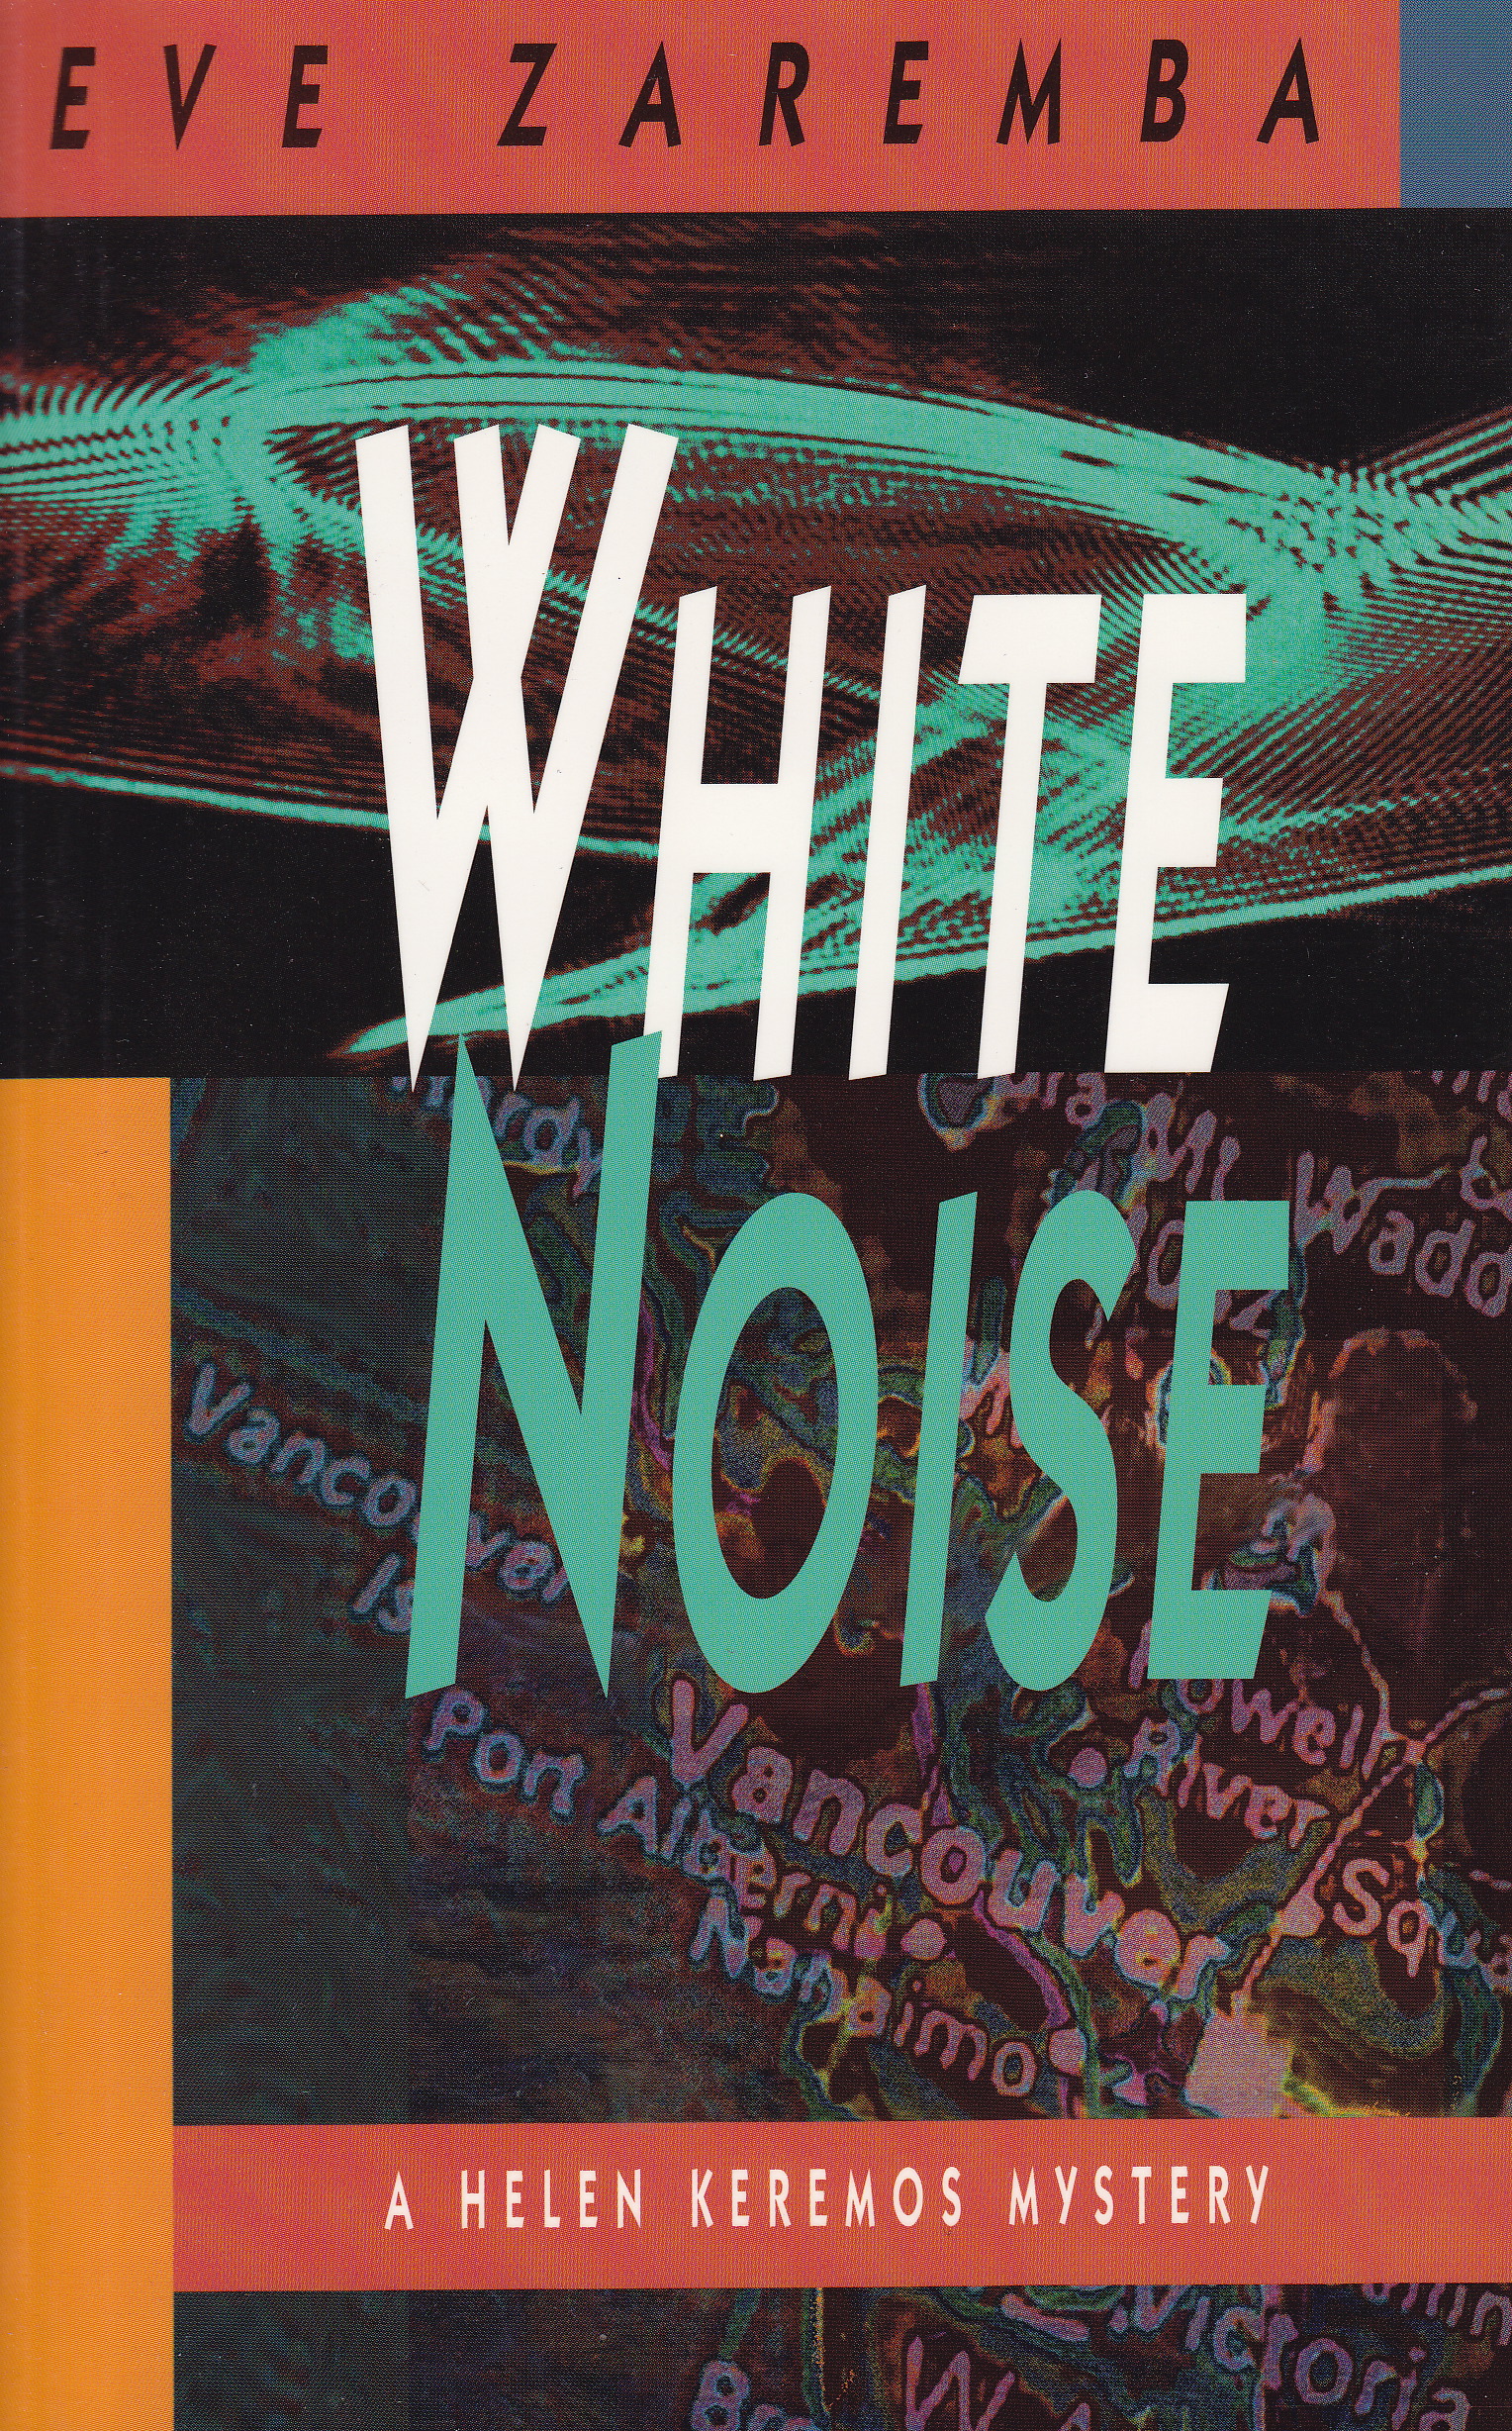 White　Press　Second　Noise　—　Story